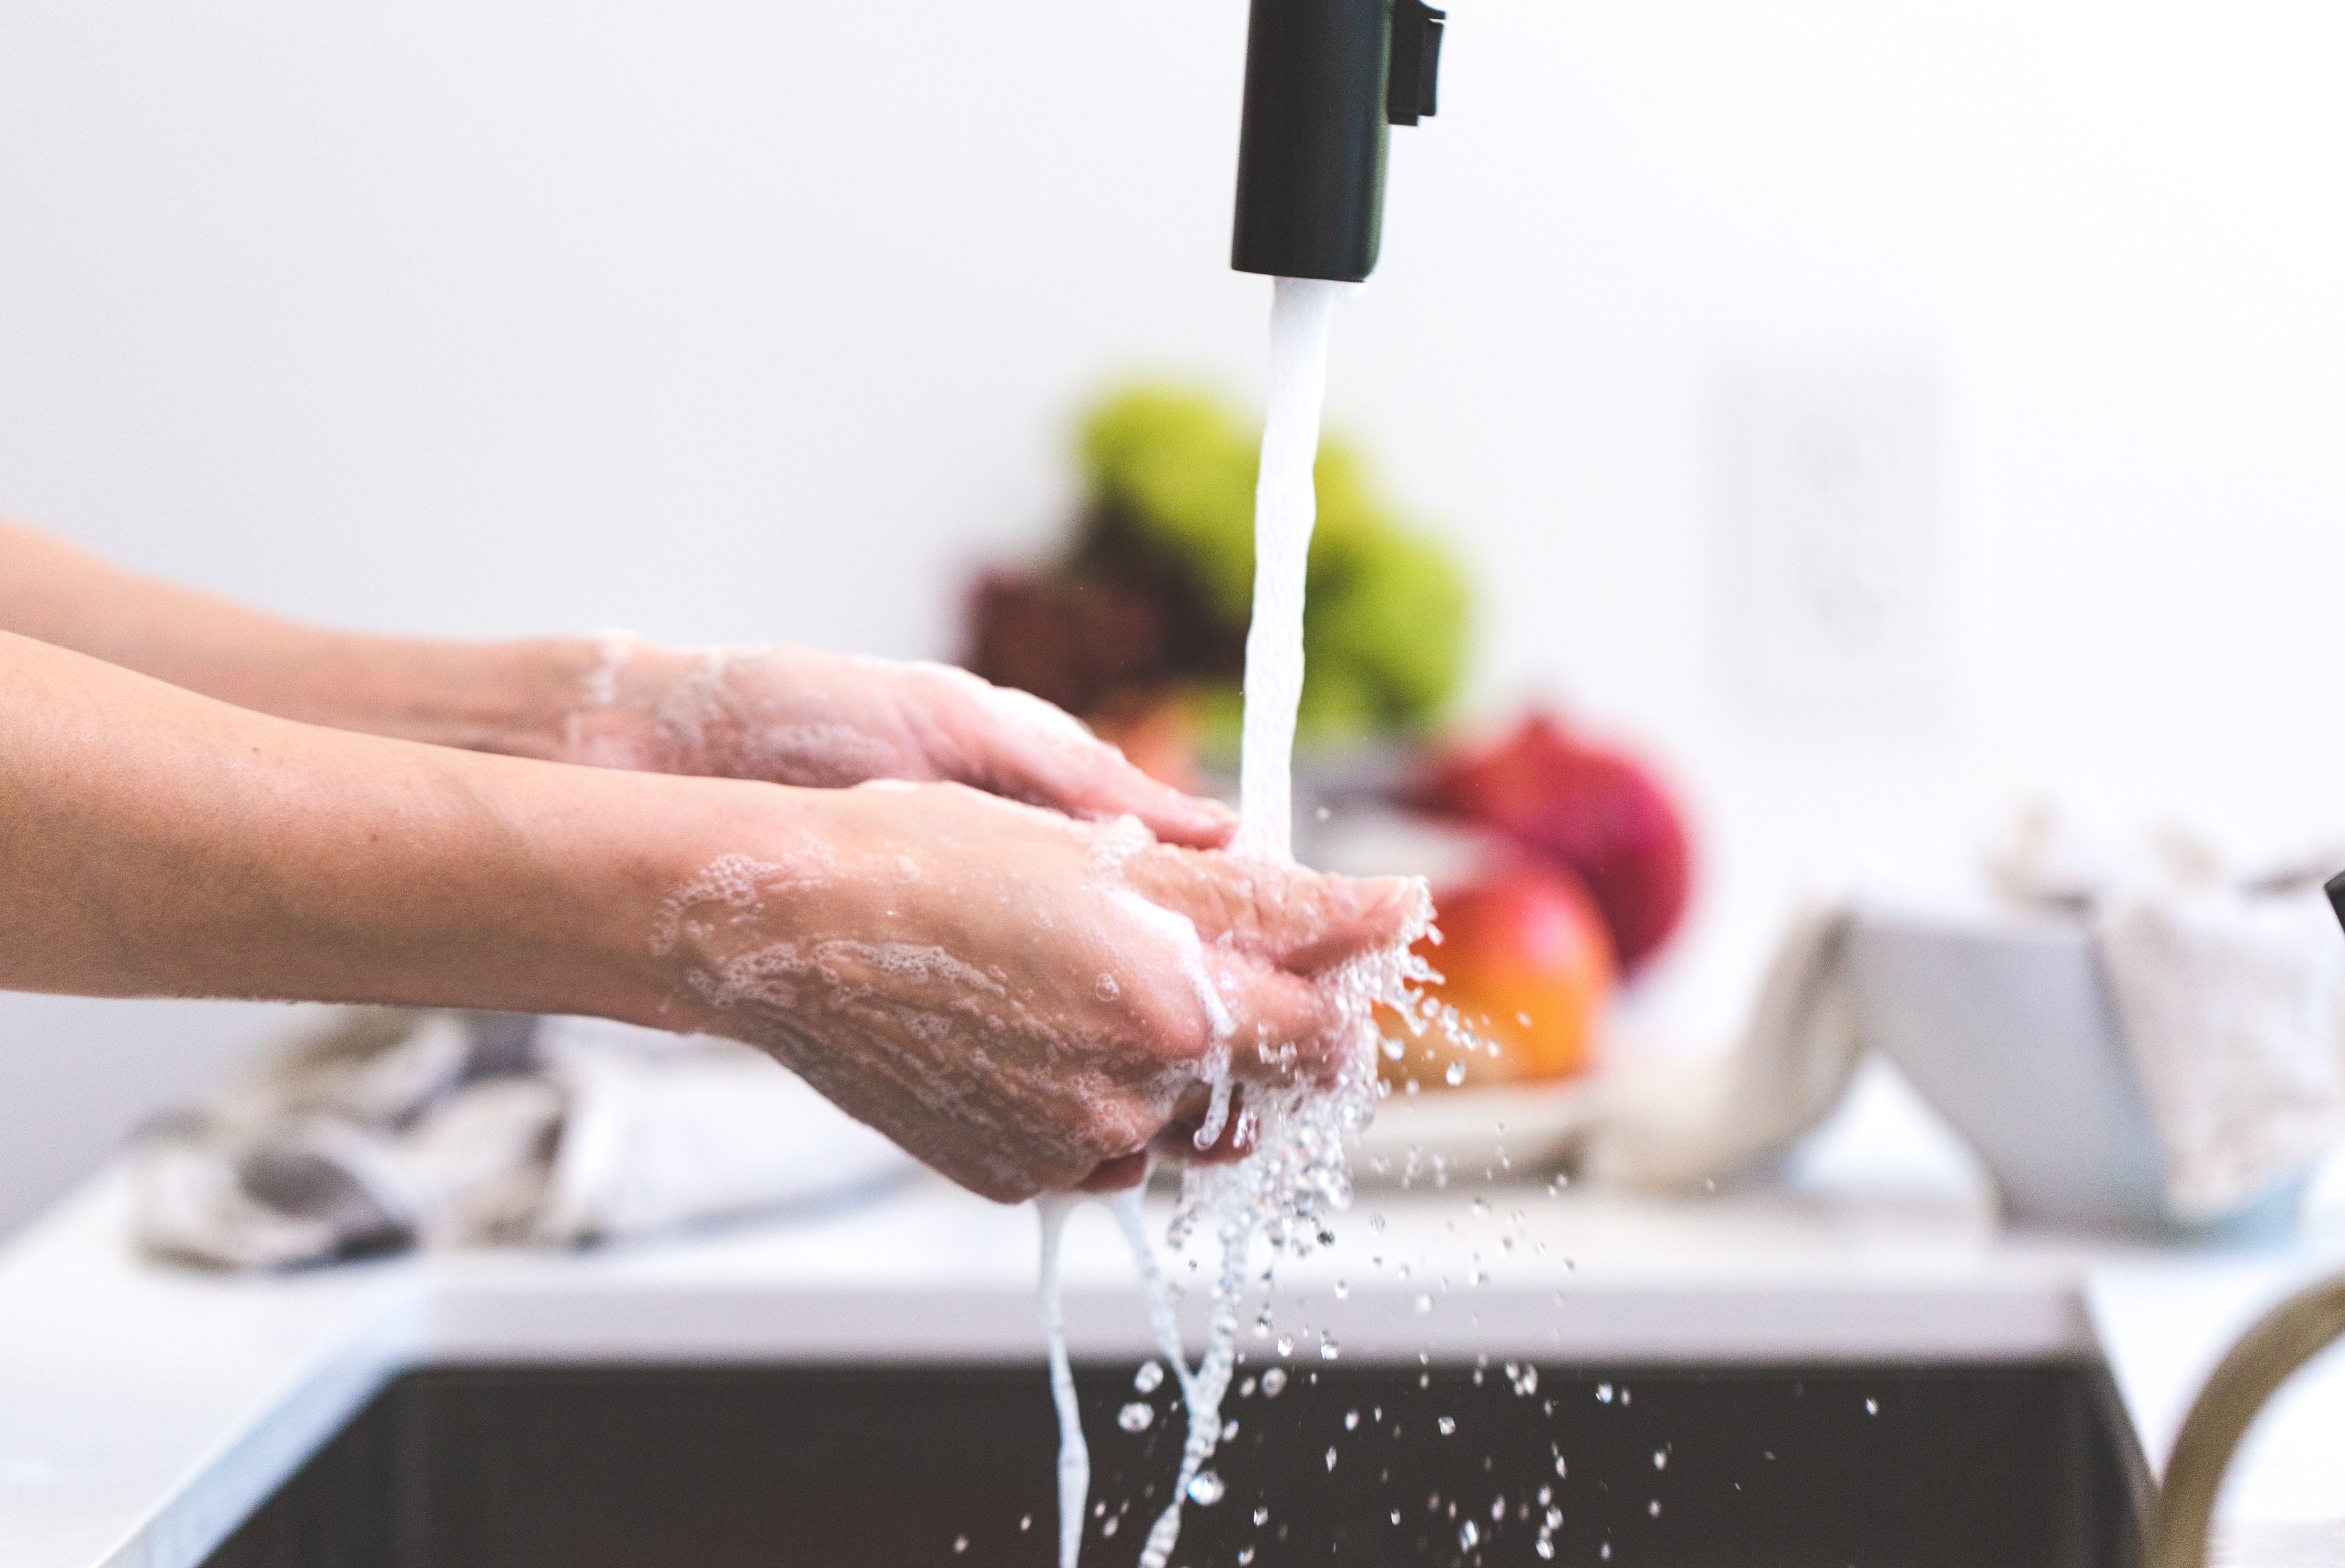 Image depicts a pair of hands being washed underneath a kitchen faucet with a bowl of fruit in the background